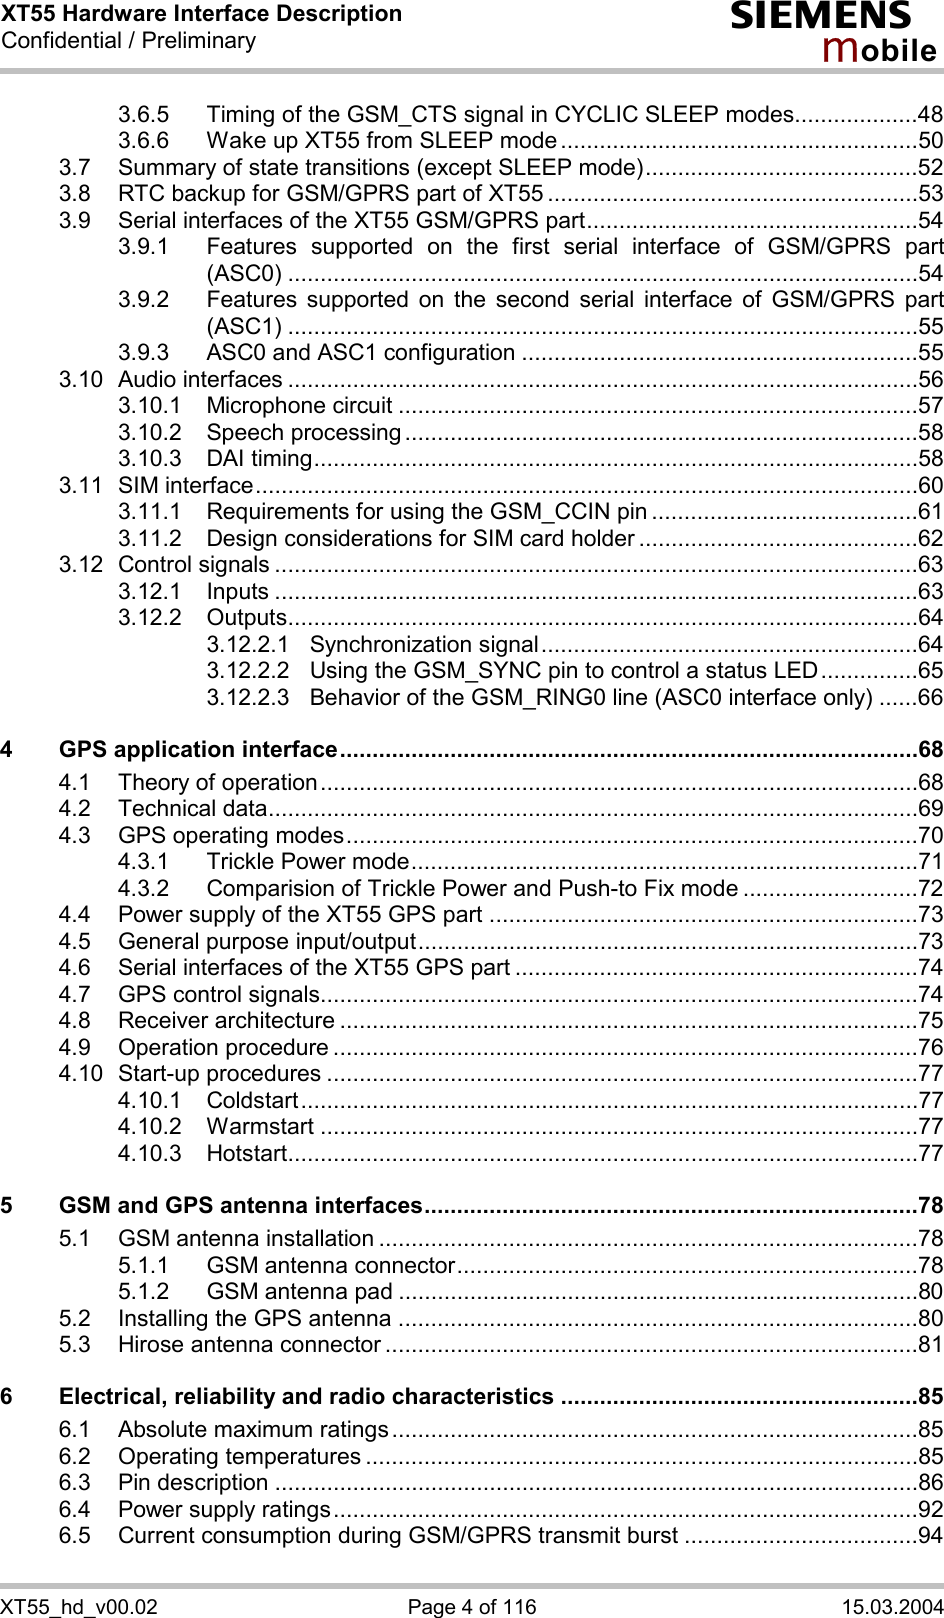 XT55 Hardware Interface Description Confidential / Preliminary s mo b i l e XT55_hd_v00.02  Page 4 of 116  15.03.2004 3.6.5 Timing of the GSM_CTS signal in CYCLIC SLEEP modes...................48 3.6.6 Wake up XT55 from SLEEP mode .......................................................50 3.7 Summary of state transitions (except SLEEP mode)..........................................52 3.8 RTC backup for GSM/GPRS part of XT55 .........................................................53 3.9 Serial interfaces of the XT55 GSM/GPRS part...................................................54 3.9.1 Features supported on the first serial interface of GSM/GPRS part (ASC0) .................................................................................................54 3.9.2 Features supported on the second serial interface of GSM/GPRS part (ASC1) .................................................................................................55 3.9.3 ASC0 and ASC1 configuration .............................................................55 3.10 Audio interfaces .................................................................................................56 3.10.1 Microphone circuit ................................................................................57 3.10.2 Speech processing ...............................................................................58 3.10.3 DAI timing.............................................................................................58 3.11 SIM interface......................................................................................................60 3.11.1 Requirements for using the GSM_CCIN pin .........................................61 3.11.2 Design considerations for SIM card holder ...........................................62 3.12 Control signals ...................................................................................................63 3.12.1 Inputs ...................................................................................................63 3.12.2 Outputs.................................................................................................64 3.12.2.1 Synchronization signal..........................................................64 3.12.2.2 Using the GSM_SYNC pin to control a status LED...............65 3.12.2.3 Behavior of the GSM_RING0 line (ASC0 interface only) ......66 4 GPS application interface.........................................................................................68 4.1 Theory of operation............................................................................................68 4.2 Technical data....................................................................................................69 4.3 GPS operating modes........................................................................................70 4.3.1 Trickle Power mode..............................................................................71 4.3.2 Comparision of Trickle Power and Push-to Fix mode ...........................72 4.4 Power supply of the XT55 GPS part ..................................................................73 4.5 General purpose input/output.............................................................................73 4.6 Serial interfaces of the XT55 GPS part ..............................................................74 4.7 GPS control signals............................................................................................74 4.8 Receiver architecture .........................................................................................75 4.9 Operation procedure ..........................................................................................76 4.10 Start-up procedures ...........................................................................................77 4.10.1 Coldstart...............................................................................................77 4.10.2 Warmstart ............................................................................................77 4.10.3 Hotstart.................................................................................................77 5 GSM and GPS antenna interfaces............................................................................78 5.1 GSM antenna installation ...................................................................................78 5.1.1 GSM antenna connector.......................................................................78 5.1.2 GSM antenna pad ................................................................................80 5.2 Installing the GPS antenna ................................................................................80 5.3 Hirose antenna connector ..................................................................................81 6 Electrical, reliability and radio characteristics .......................................................85 6.1 Absolute maximum ratings.................................................................................85 6.2 Operating temperatures .....................................................................................85 6.3 Pin description ...................................................................................................86 6.4 Power supply ratings..........................................................................................92 6.5 Current consumption during GSM/GPRS transmit burst ....................................94 